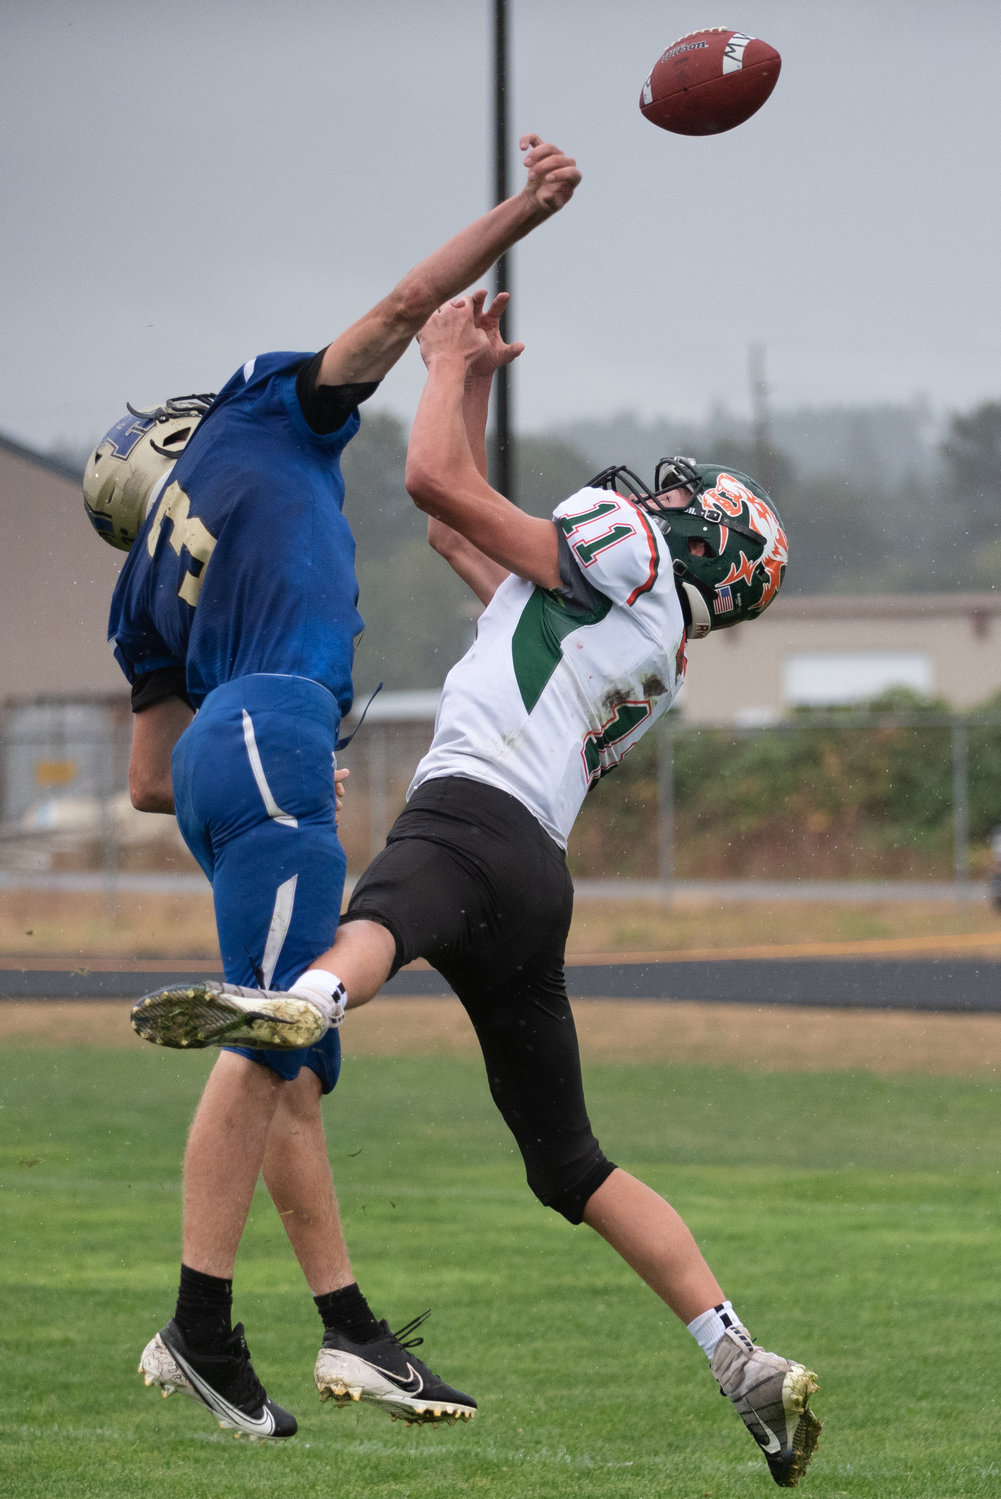 Adna defensive back Aaron Aselton (left) deflects a pass intended for MWP's Hunter Hazen (right) in the Pirates win Saturday afternoon.